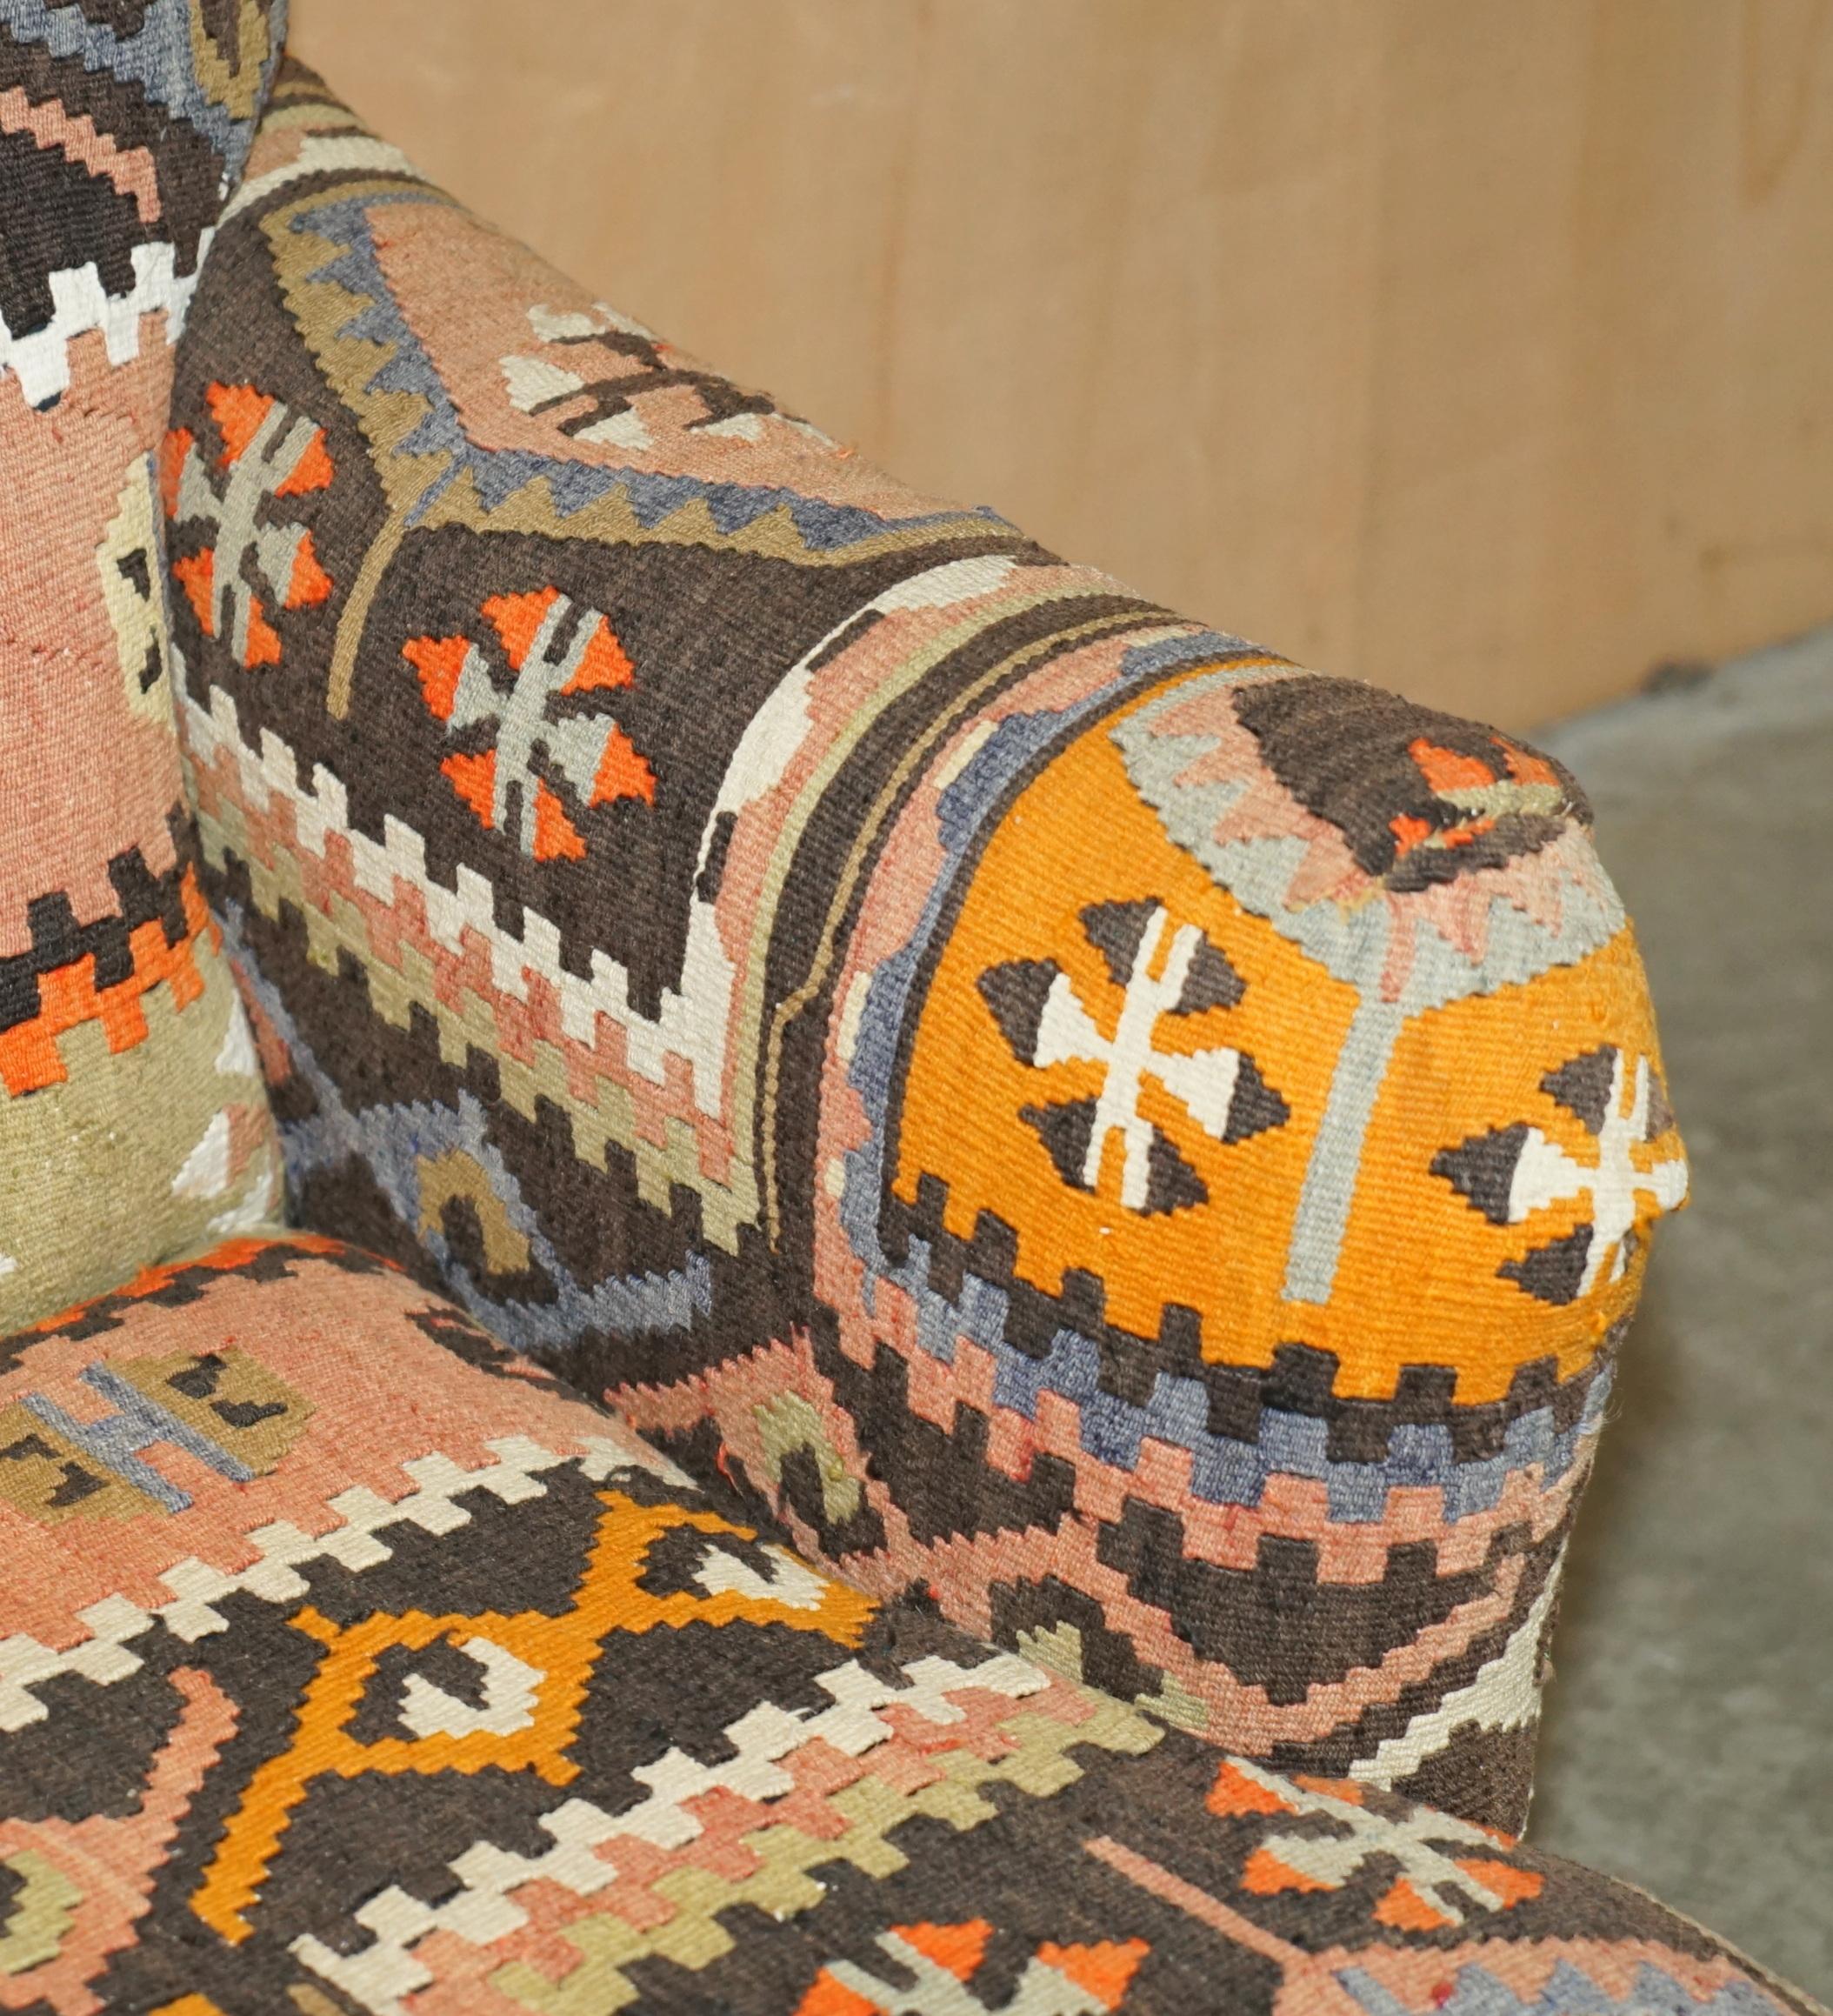 Hand-Crafted RARE & STUNNING ViNTAGE GEORGE SMITH KILIM UPHOLSTERED HOWARD & SON'S SOFA For Sale